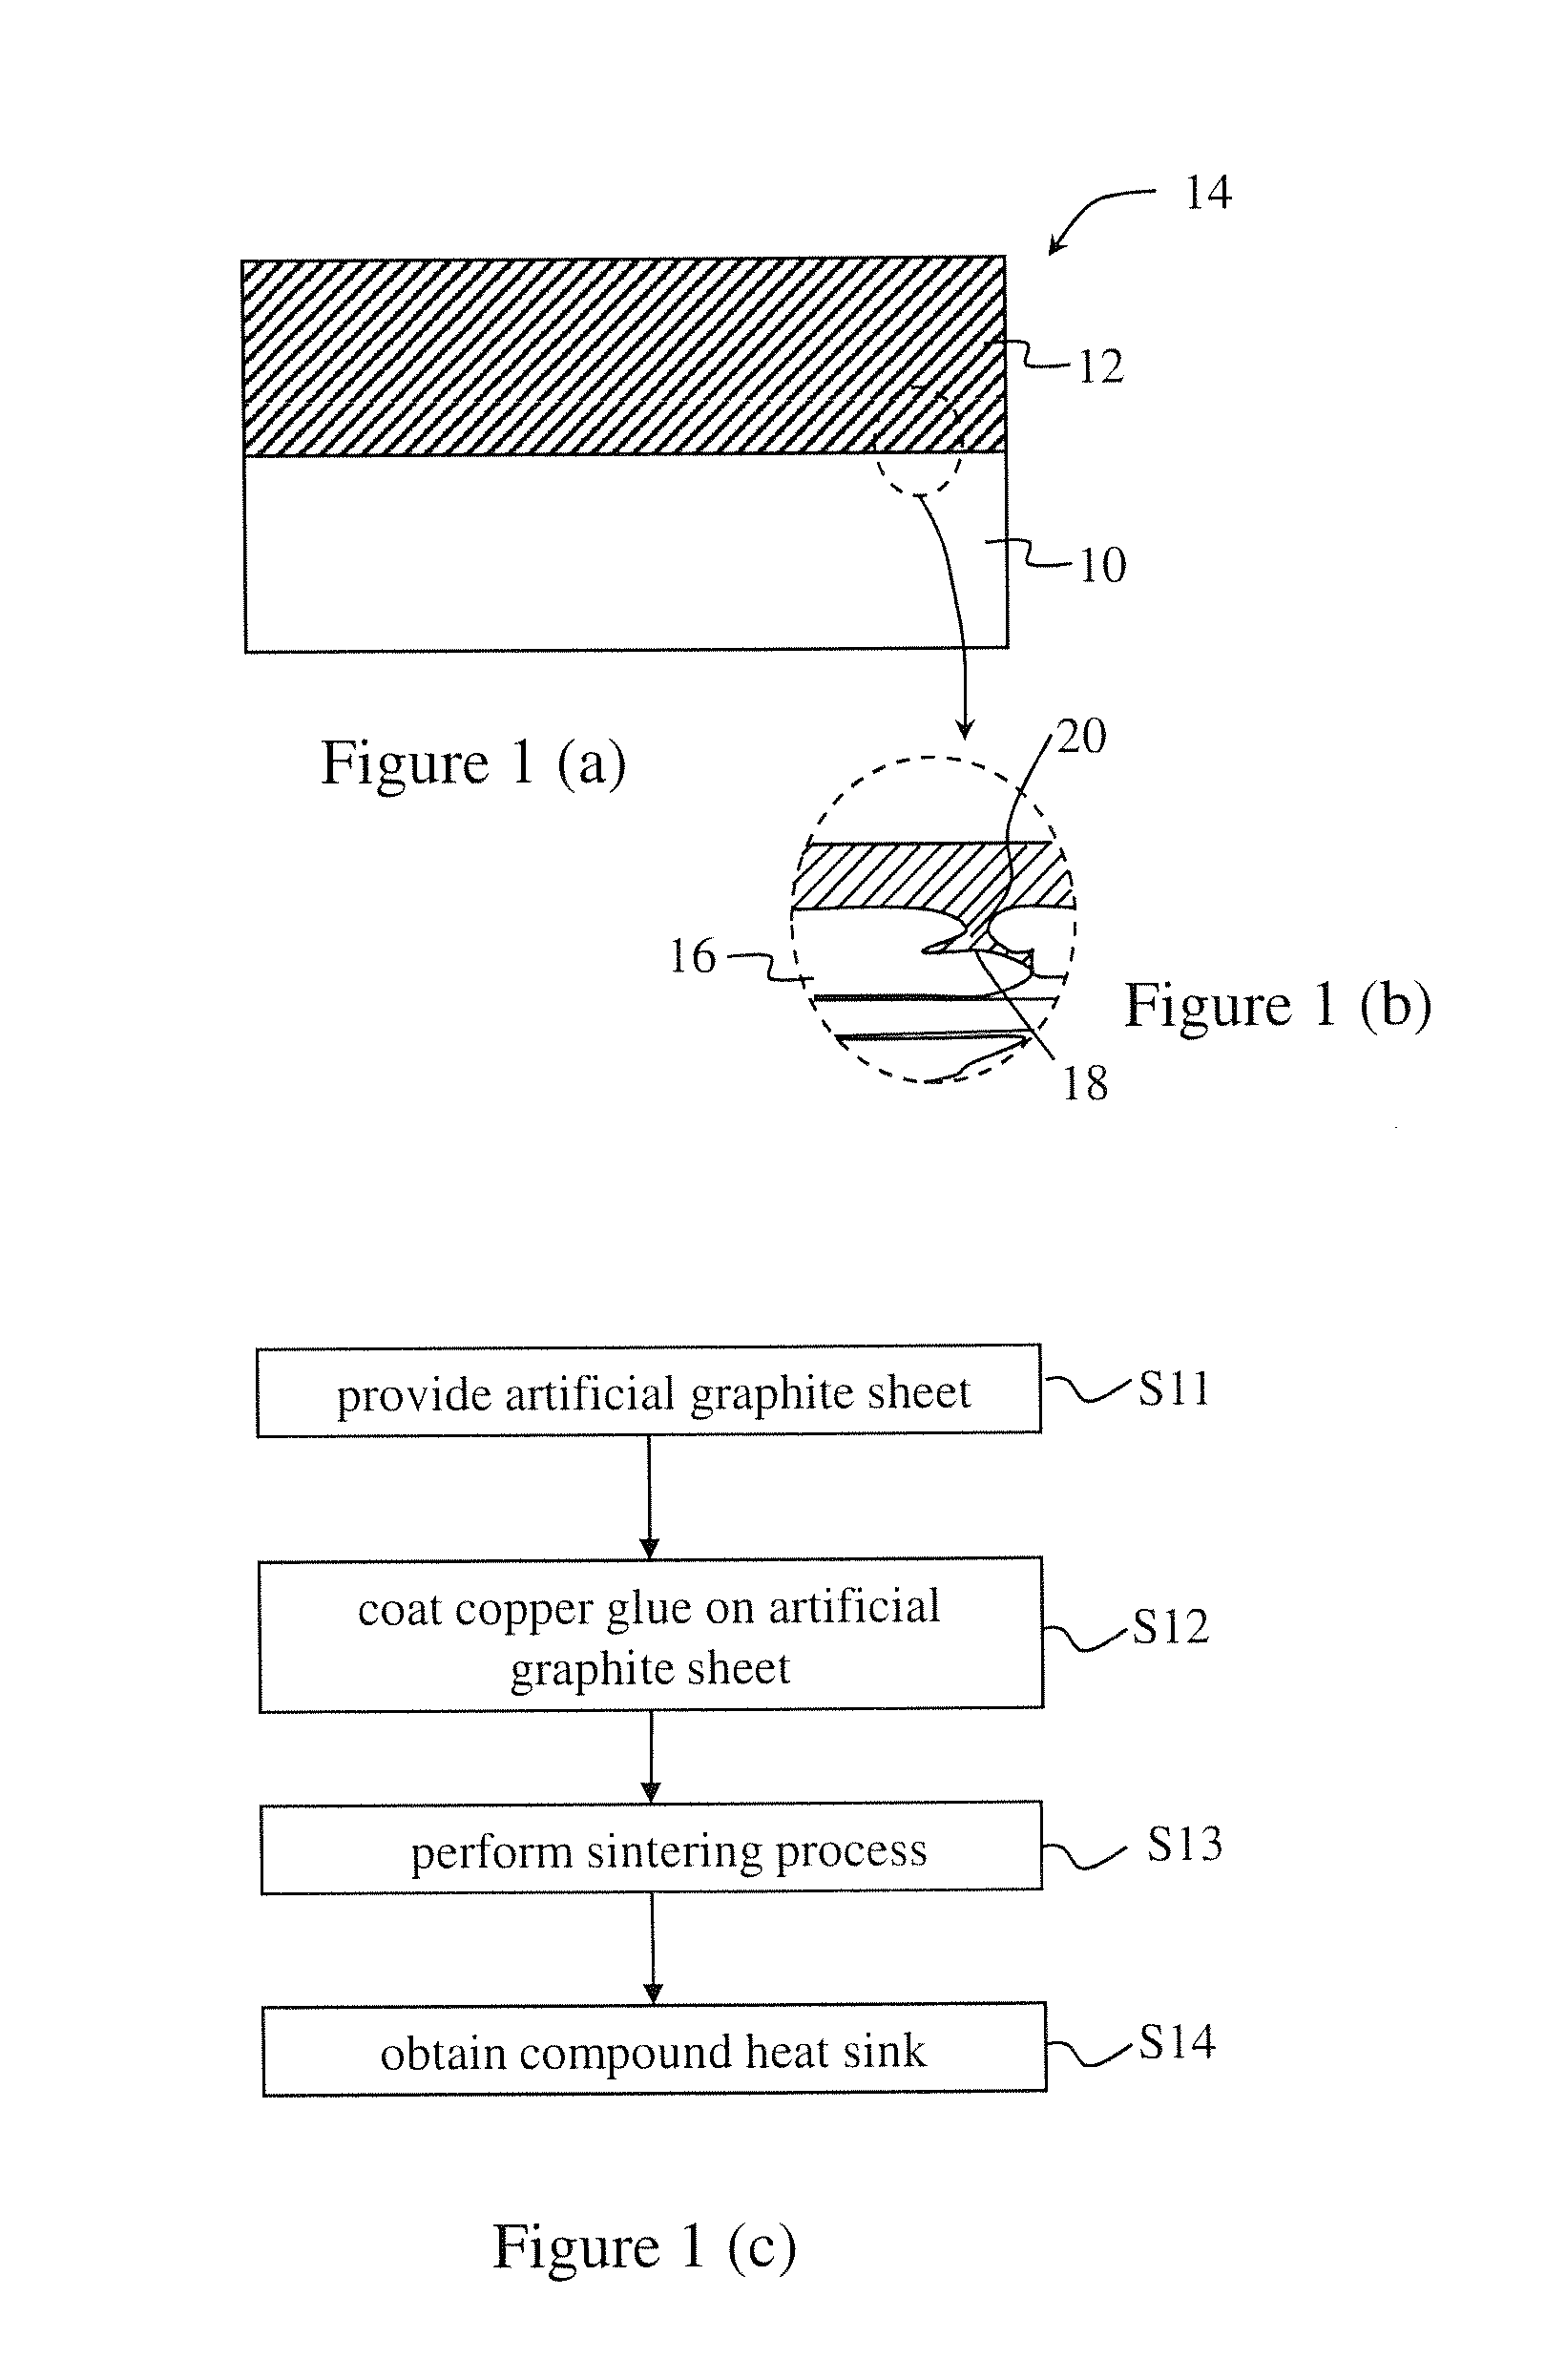 Method for manufacturing compound heat sink